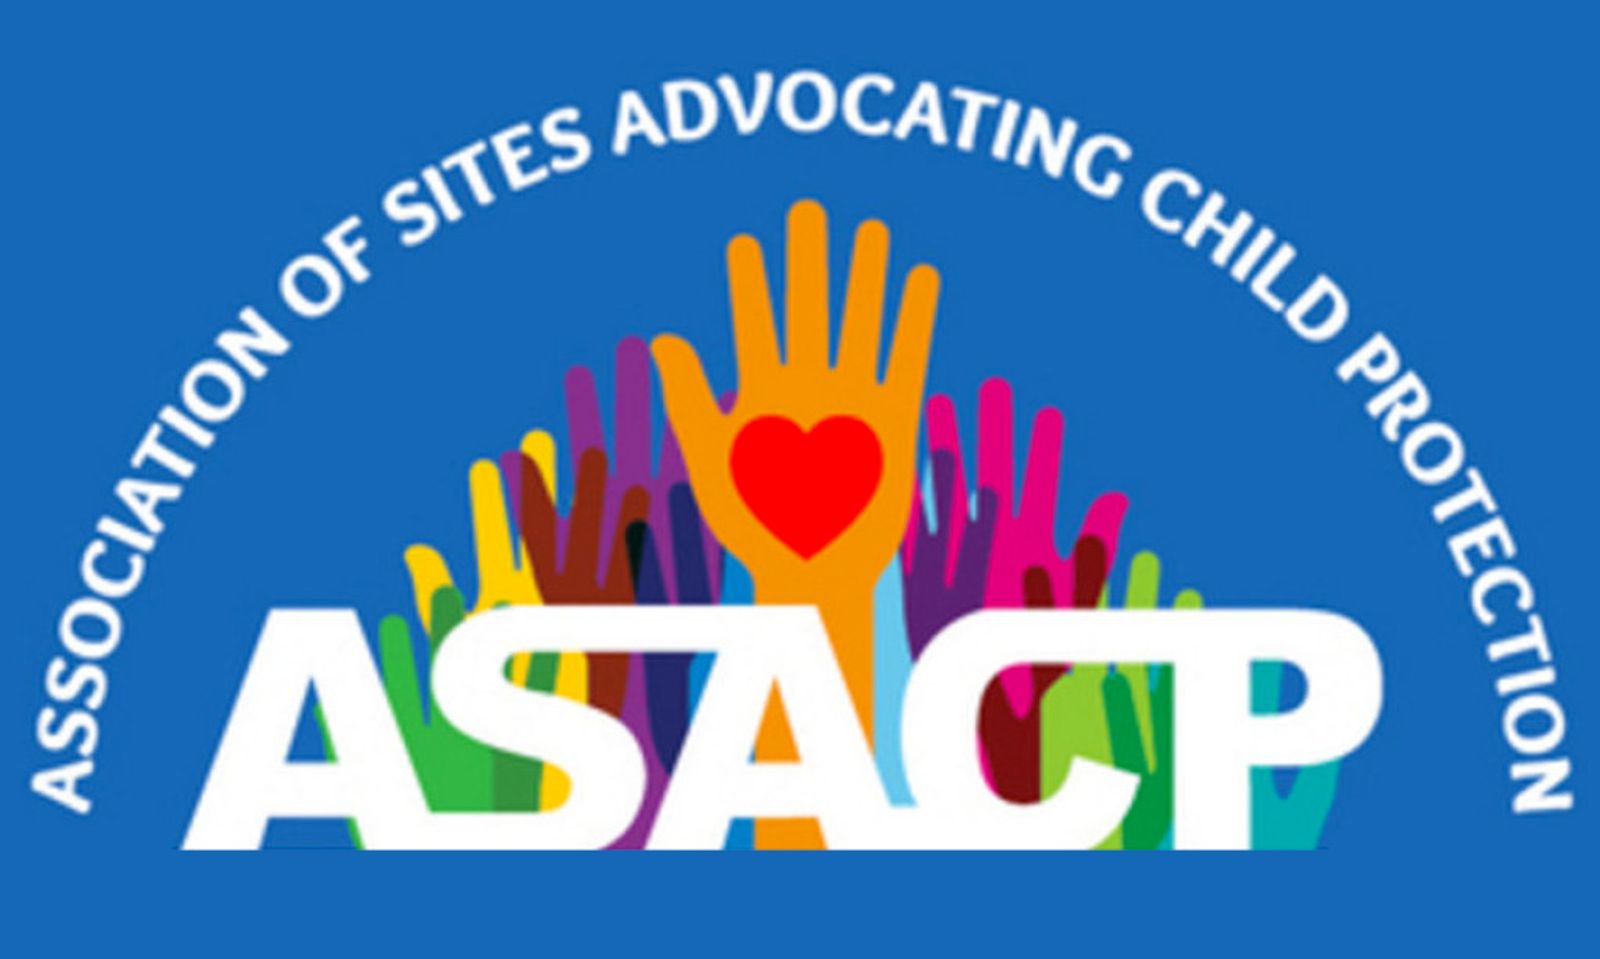 ASACP Announces Your Paysite Partner as Newest Corporate Sponsor